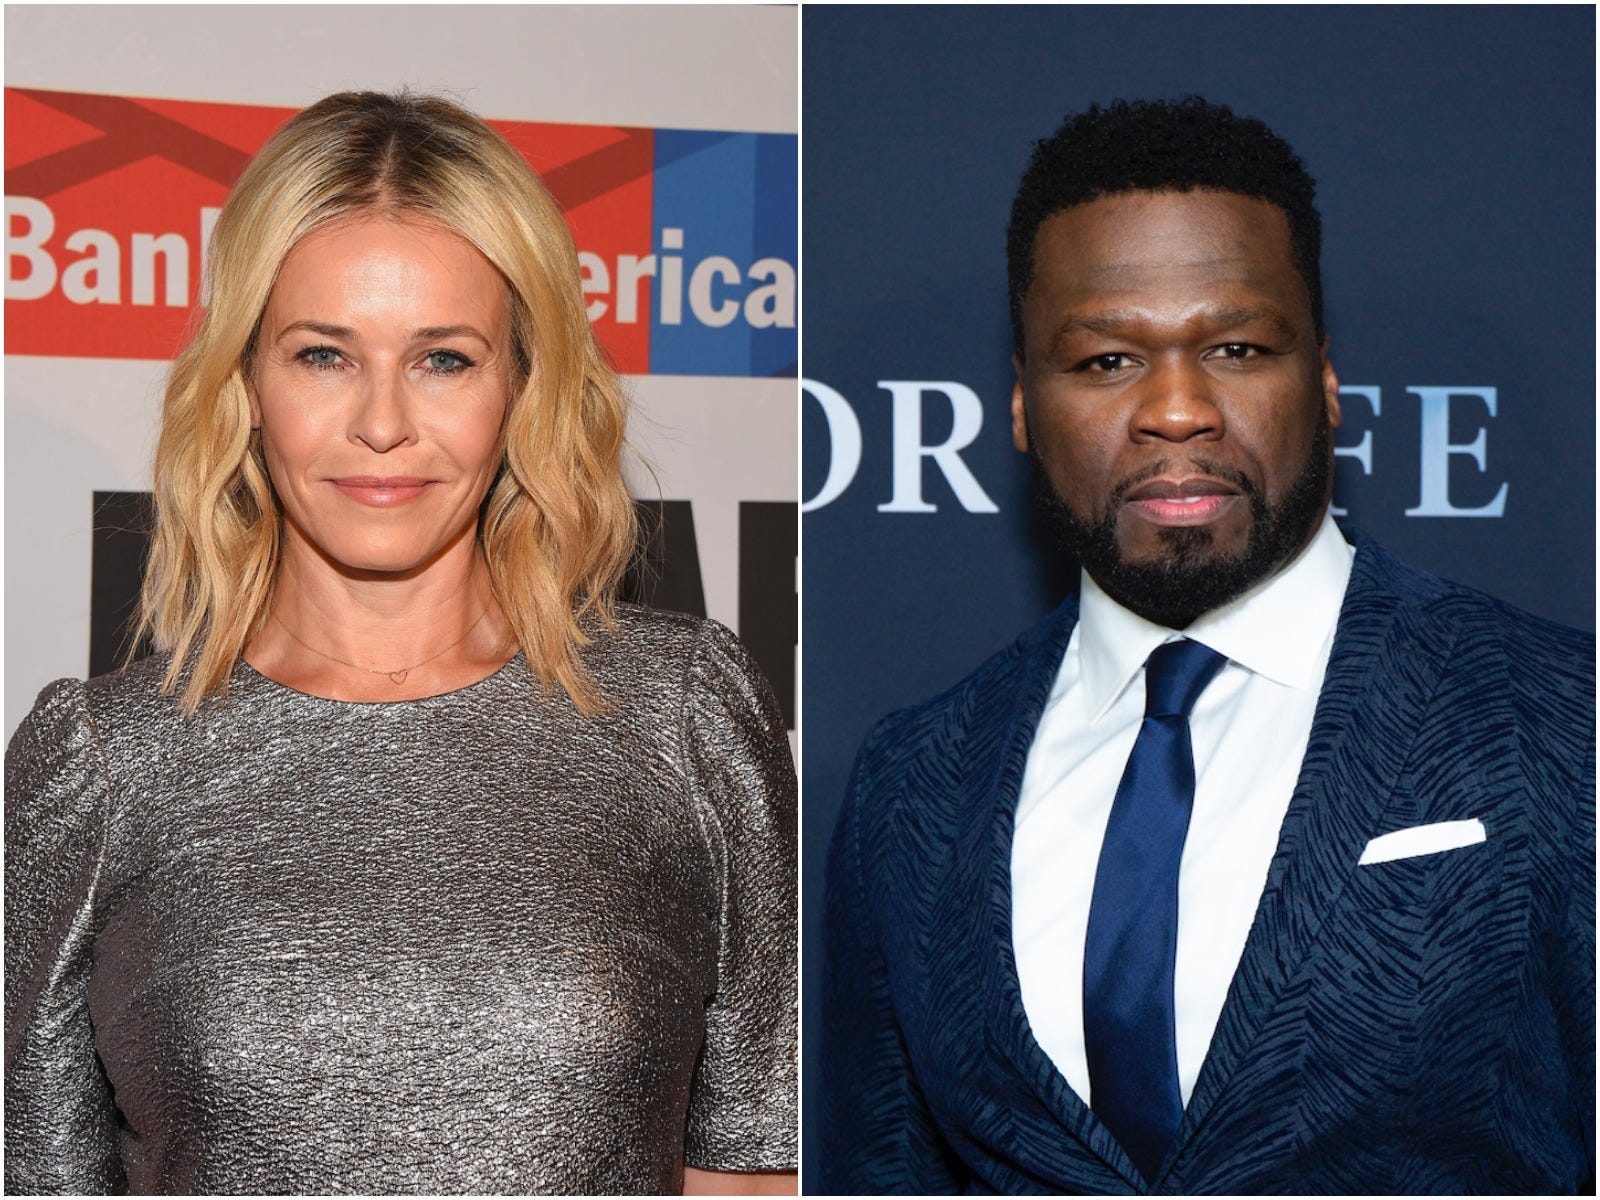 Chelsea Handler posted a series of tweets criticizing 50 Cent for supporting Donald Trump for president.